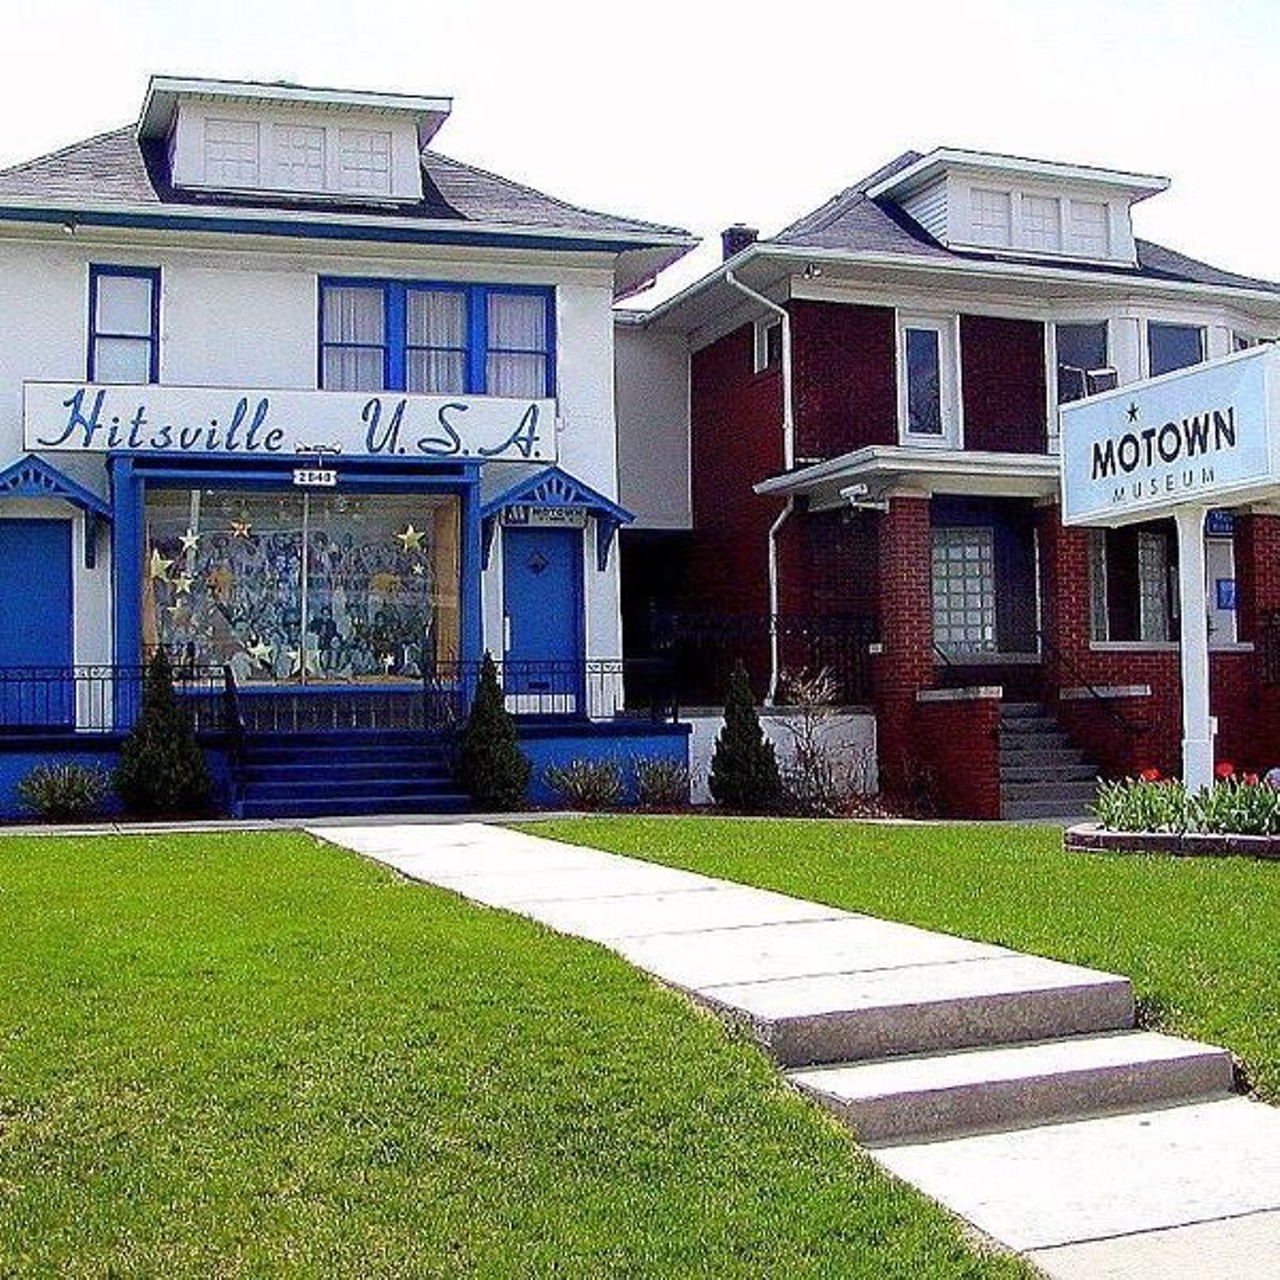 Motown Museum
2648 W Grand Blvd., Detroit; 313-875-2264
Serving as one of Southeastern Michigan&#146;s most popular tourist attractions, Motown Museum preserves the legacy of Motown Record Corporation. At its peak Motown had artists like Diana Ross and the Supremes, Stevie Wonder, Smokey Robinson, Marvin Gaye, and the Jackson 5. At the museum, you'll see Motown's first recording studio, known as Studio A, and one of Michael Jackson's hats.
Photo via Instagram user @motownmuseum